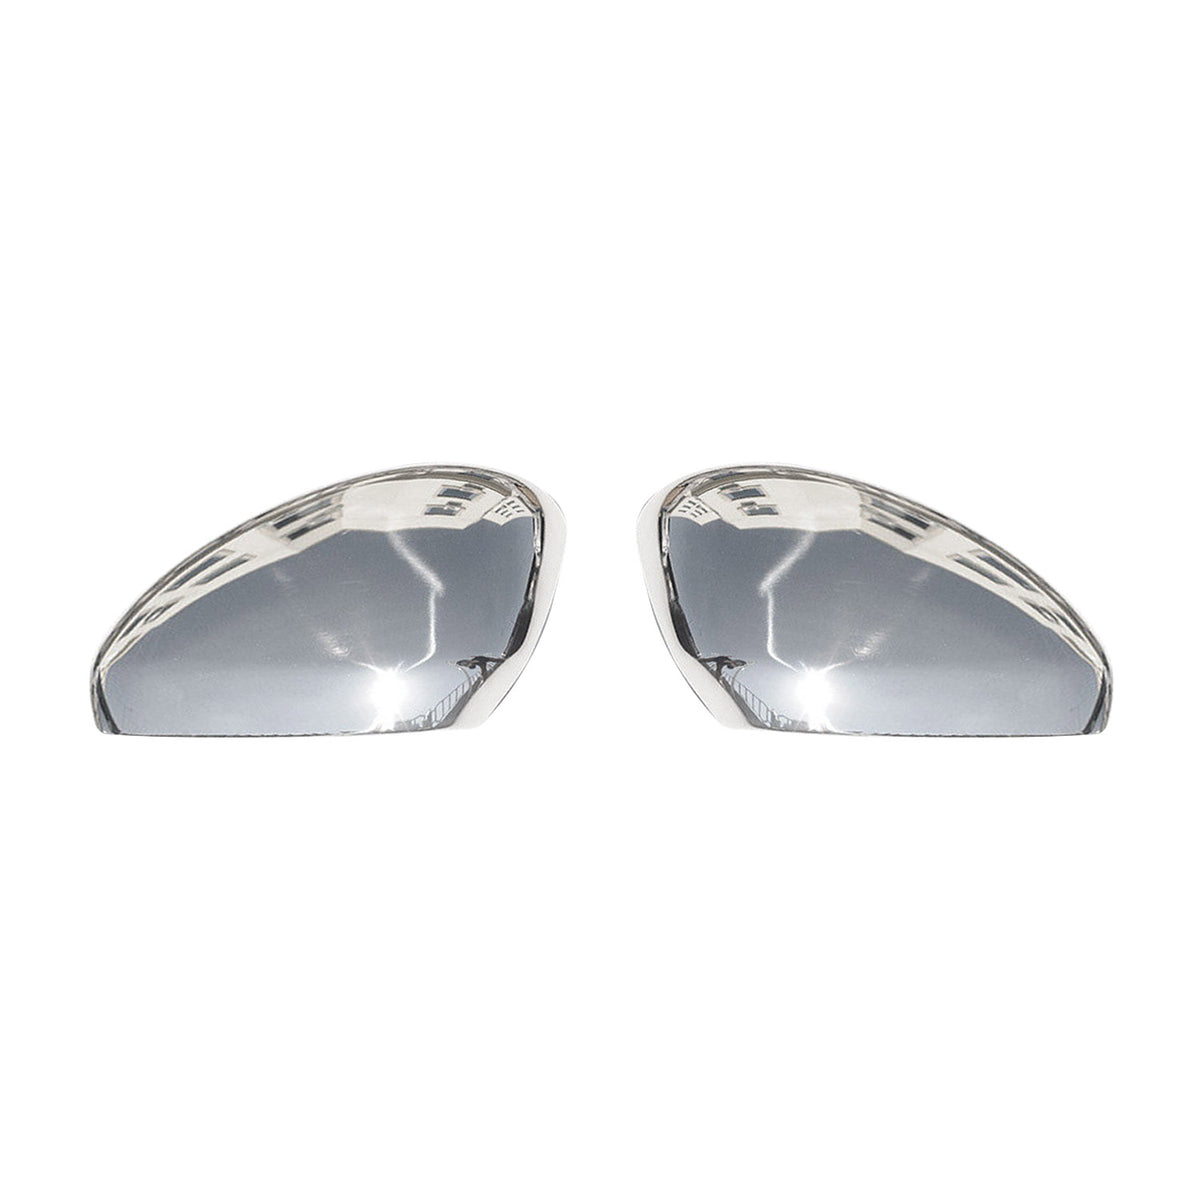 Mirror caps mirror cover for Citroen DS4 2011-2015 stainless steel silver 2 pieces